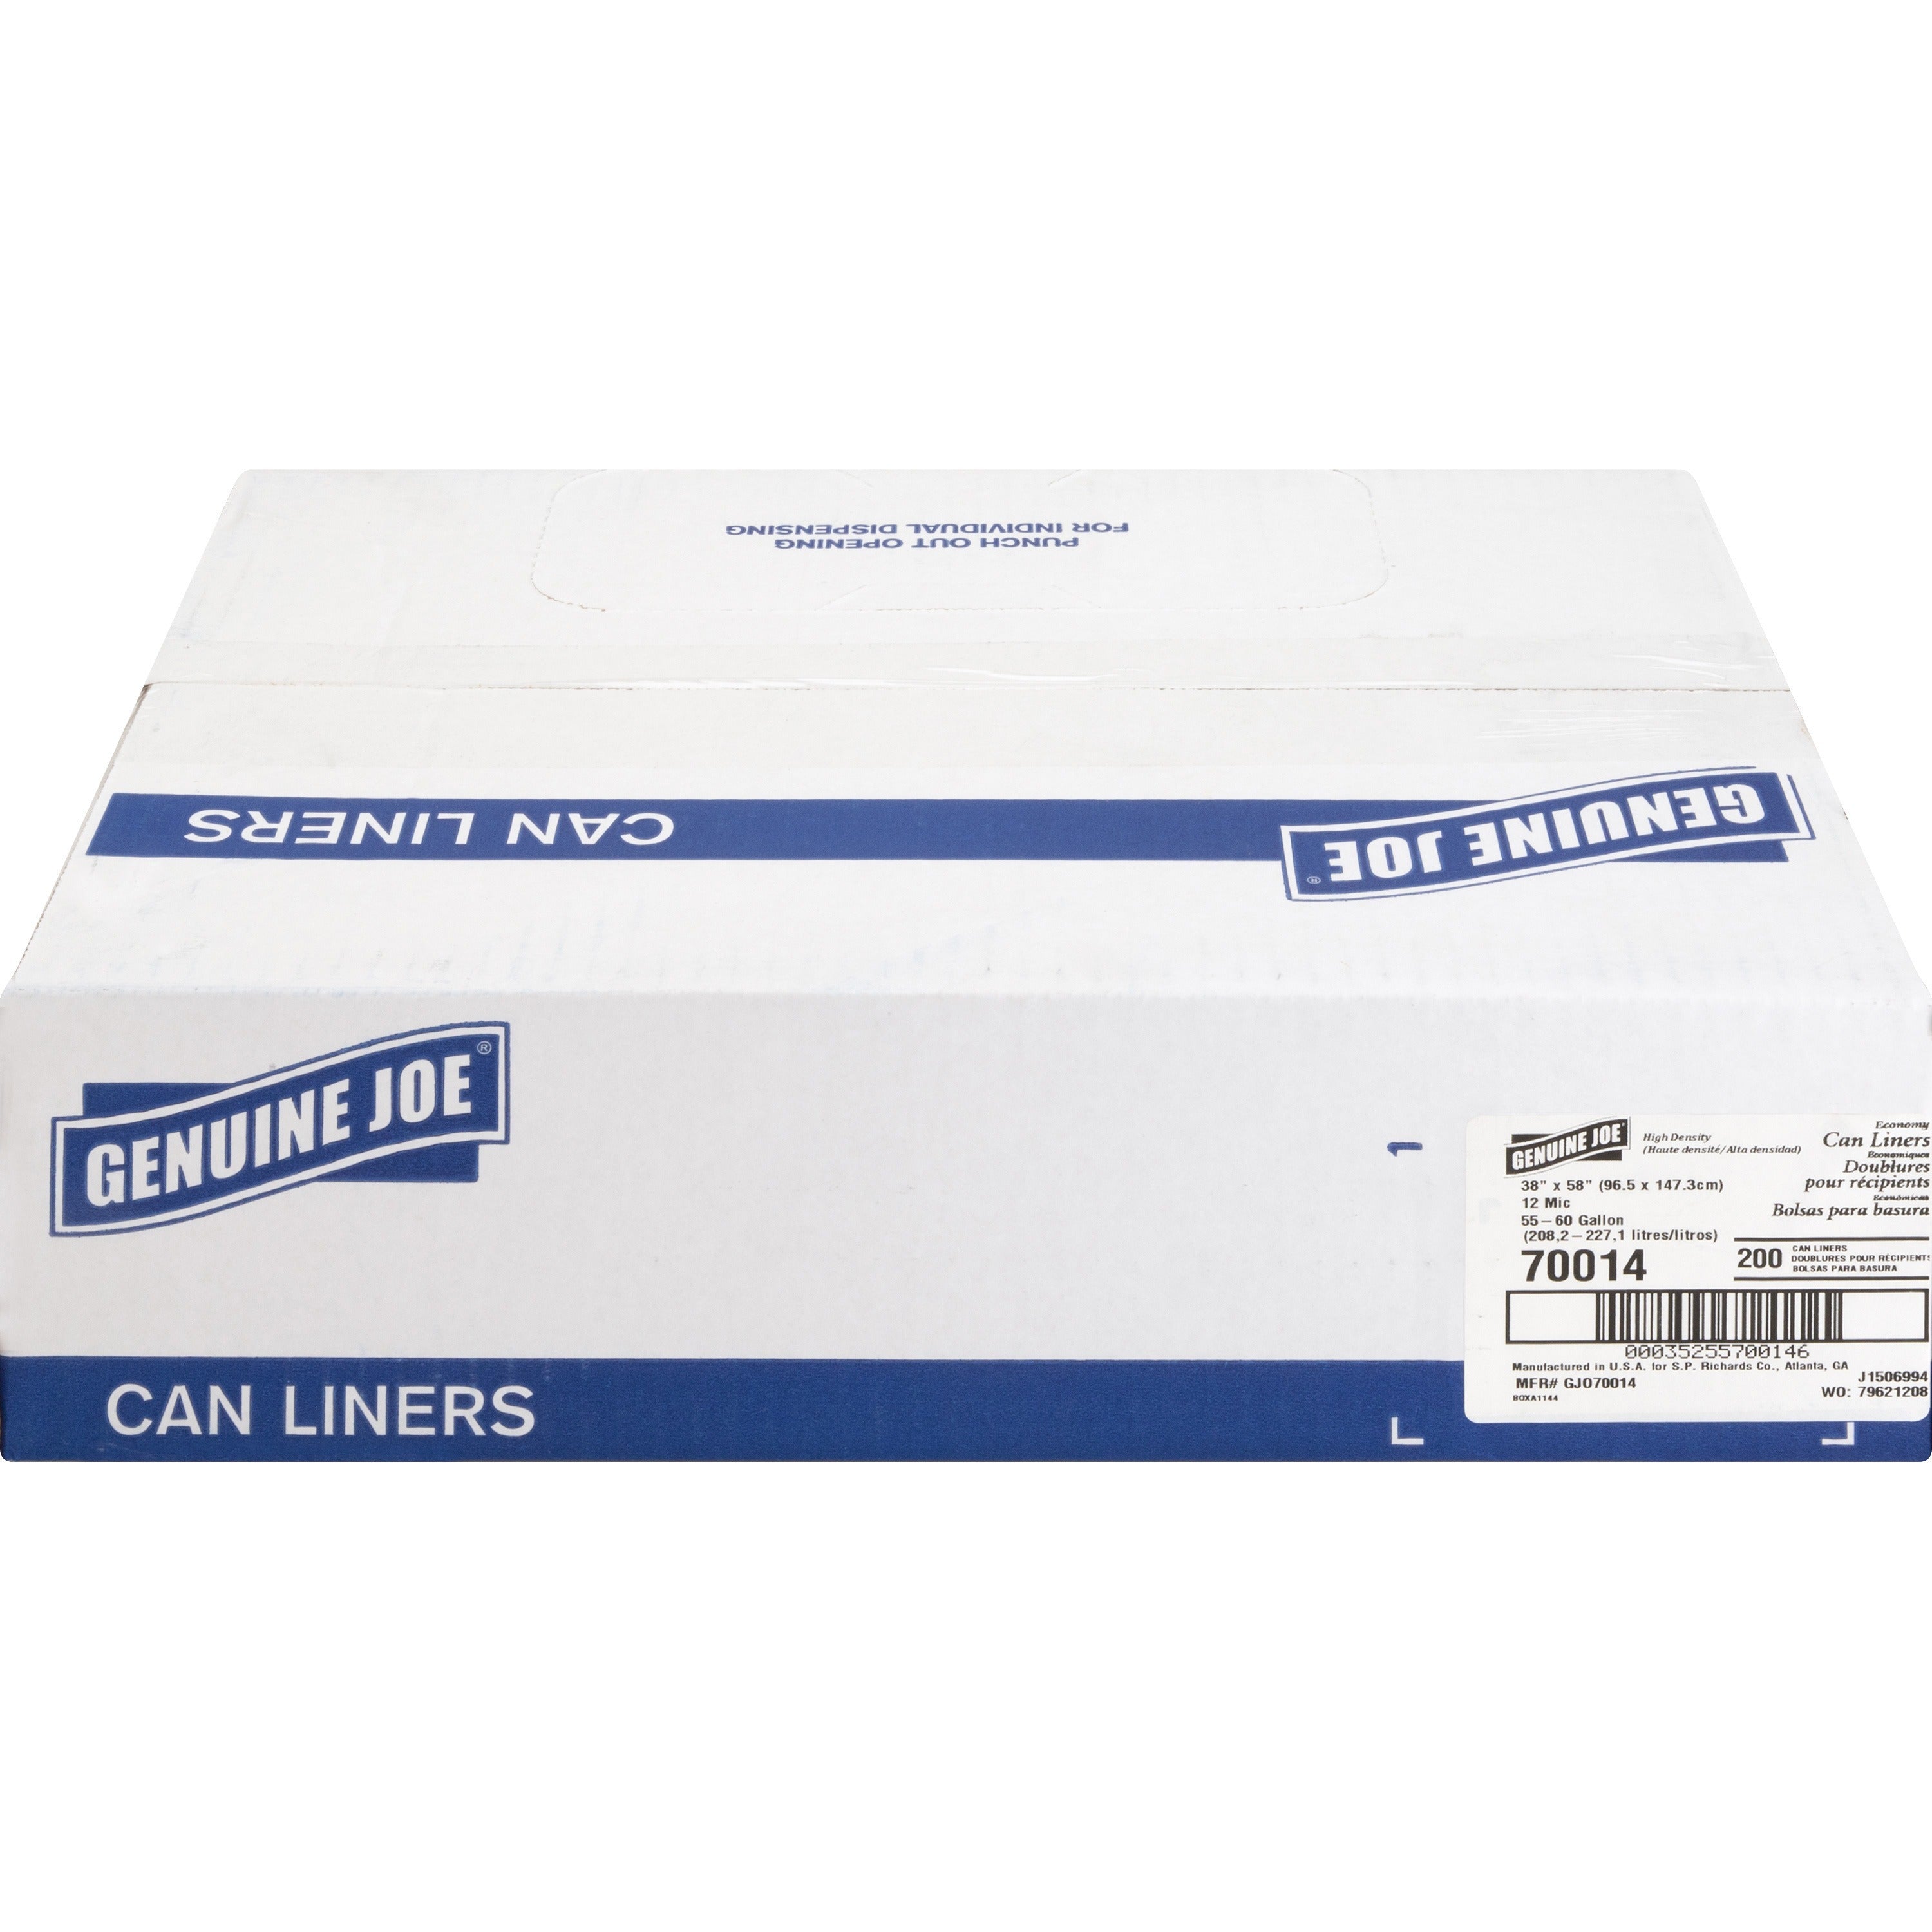 Genuine Joe Economy High-Density Can Liners - Extra Large Size - 60 gal Capacity - 38" Width x 58" Length - 0.47 mil (12 Micron) Thickness - High Density - Translucent - Resin - 200/Carton - Office Waste - 